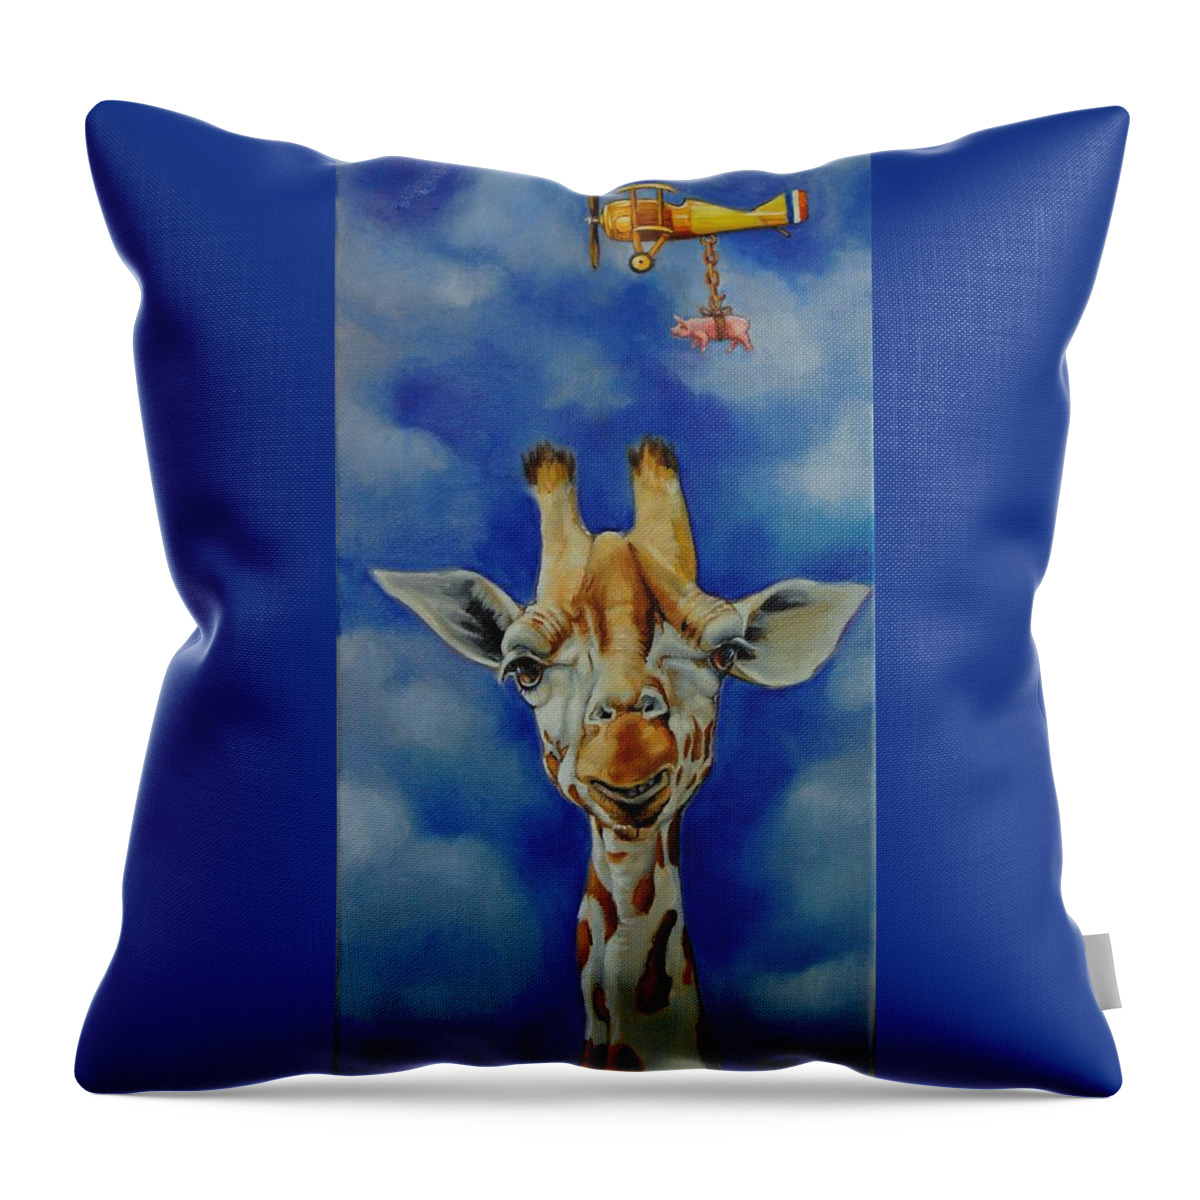 Giraffe Throw Pillow featuring the painting How's The Air Up There? by Jean Cormier